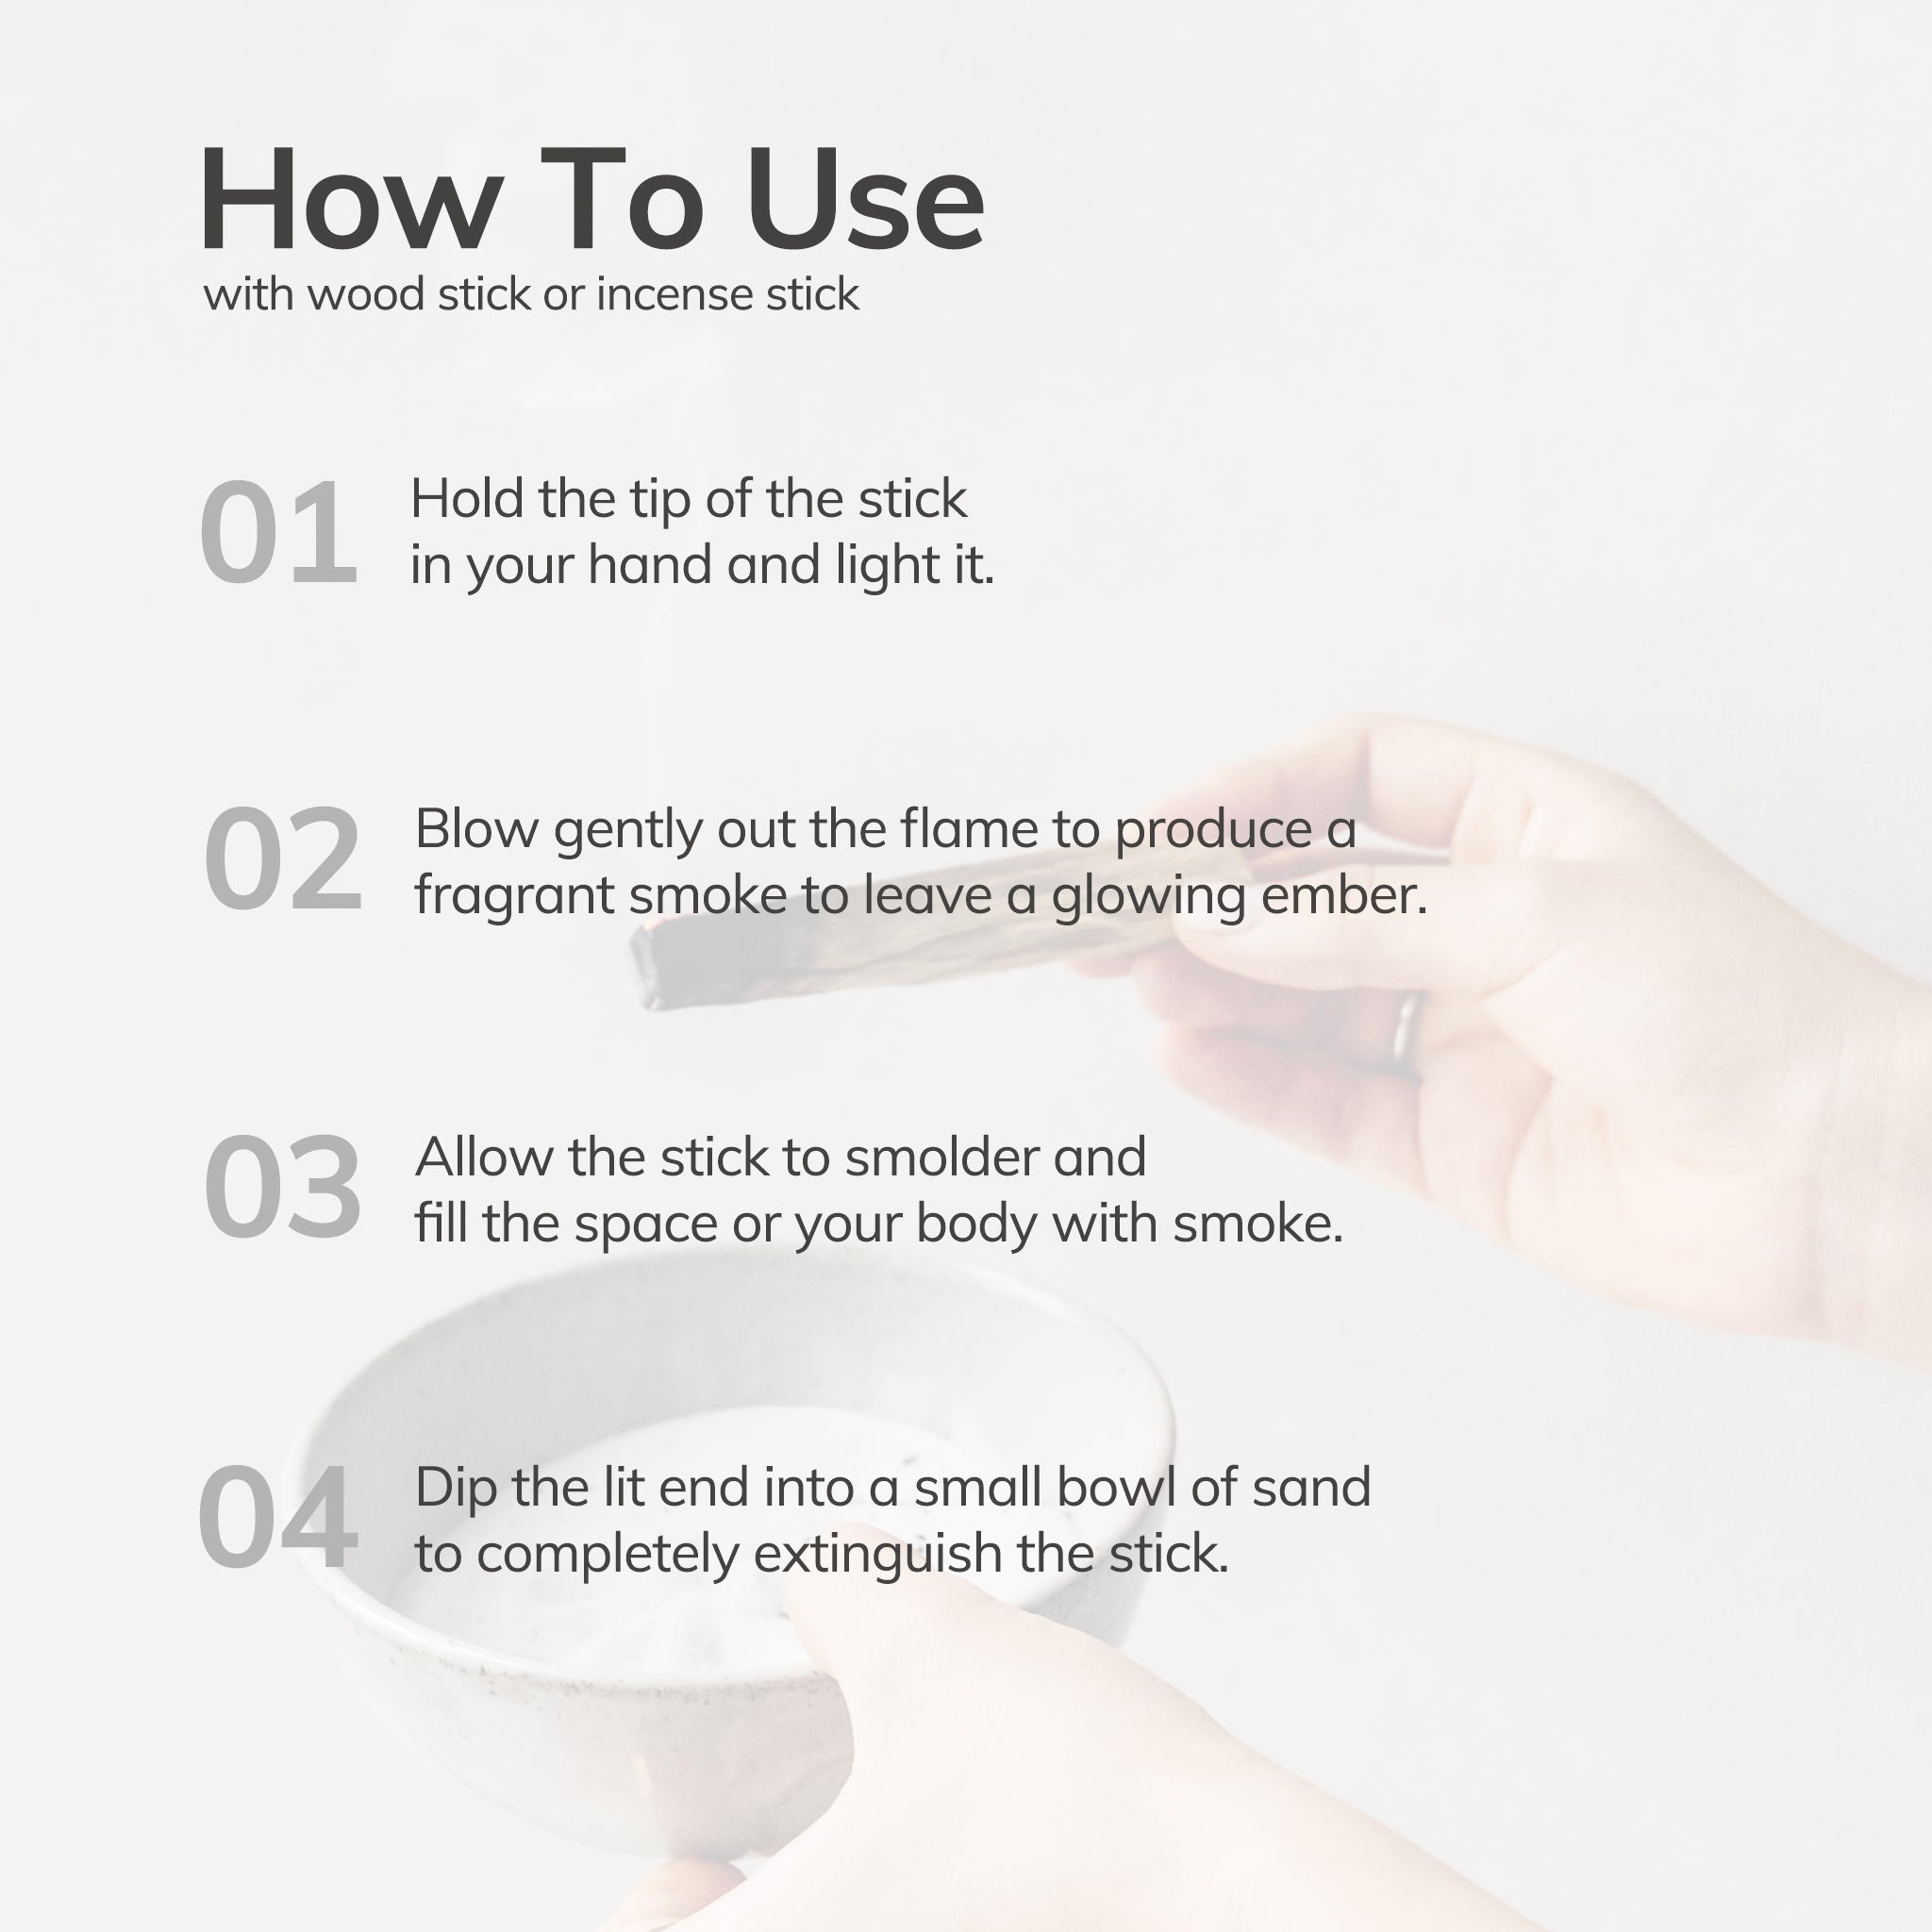 Chronological list of how to smudge incense stick.